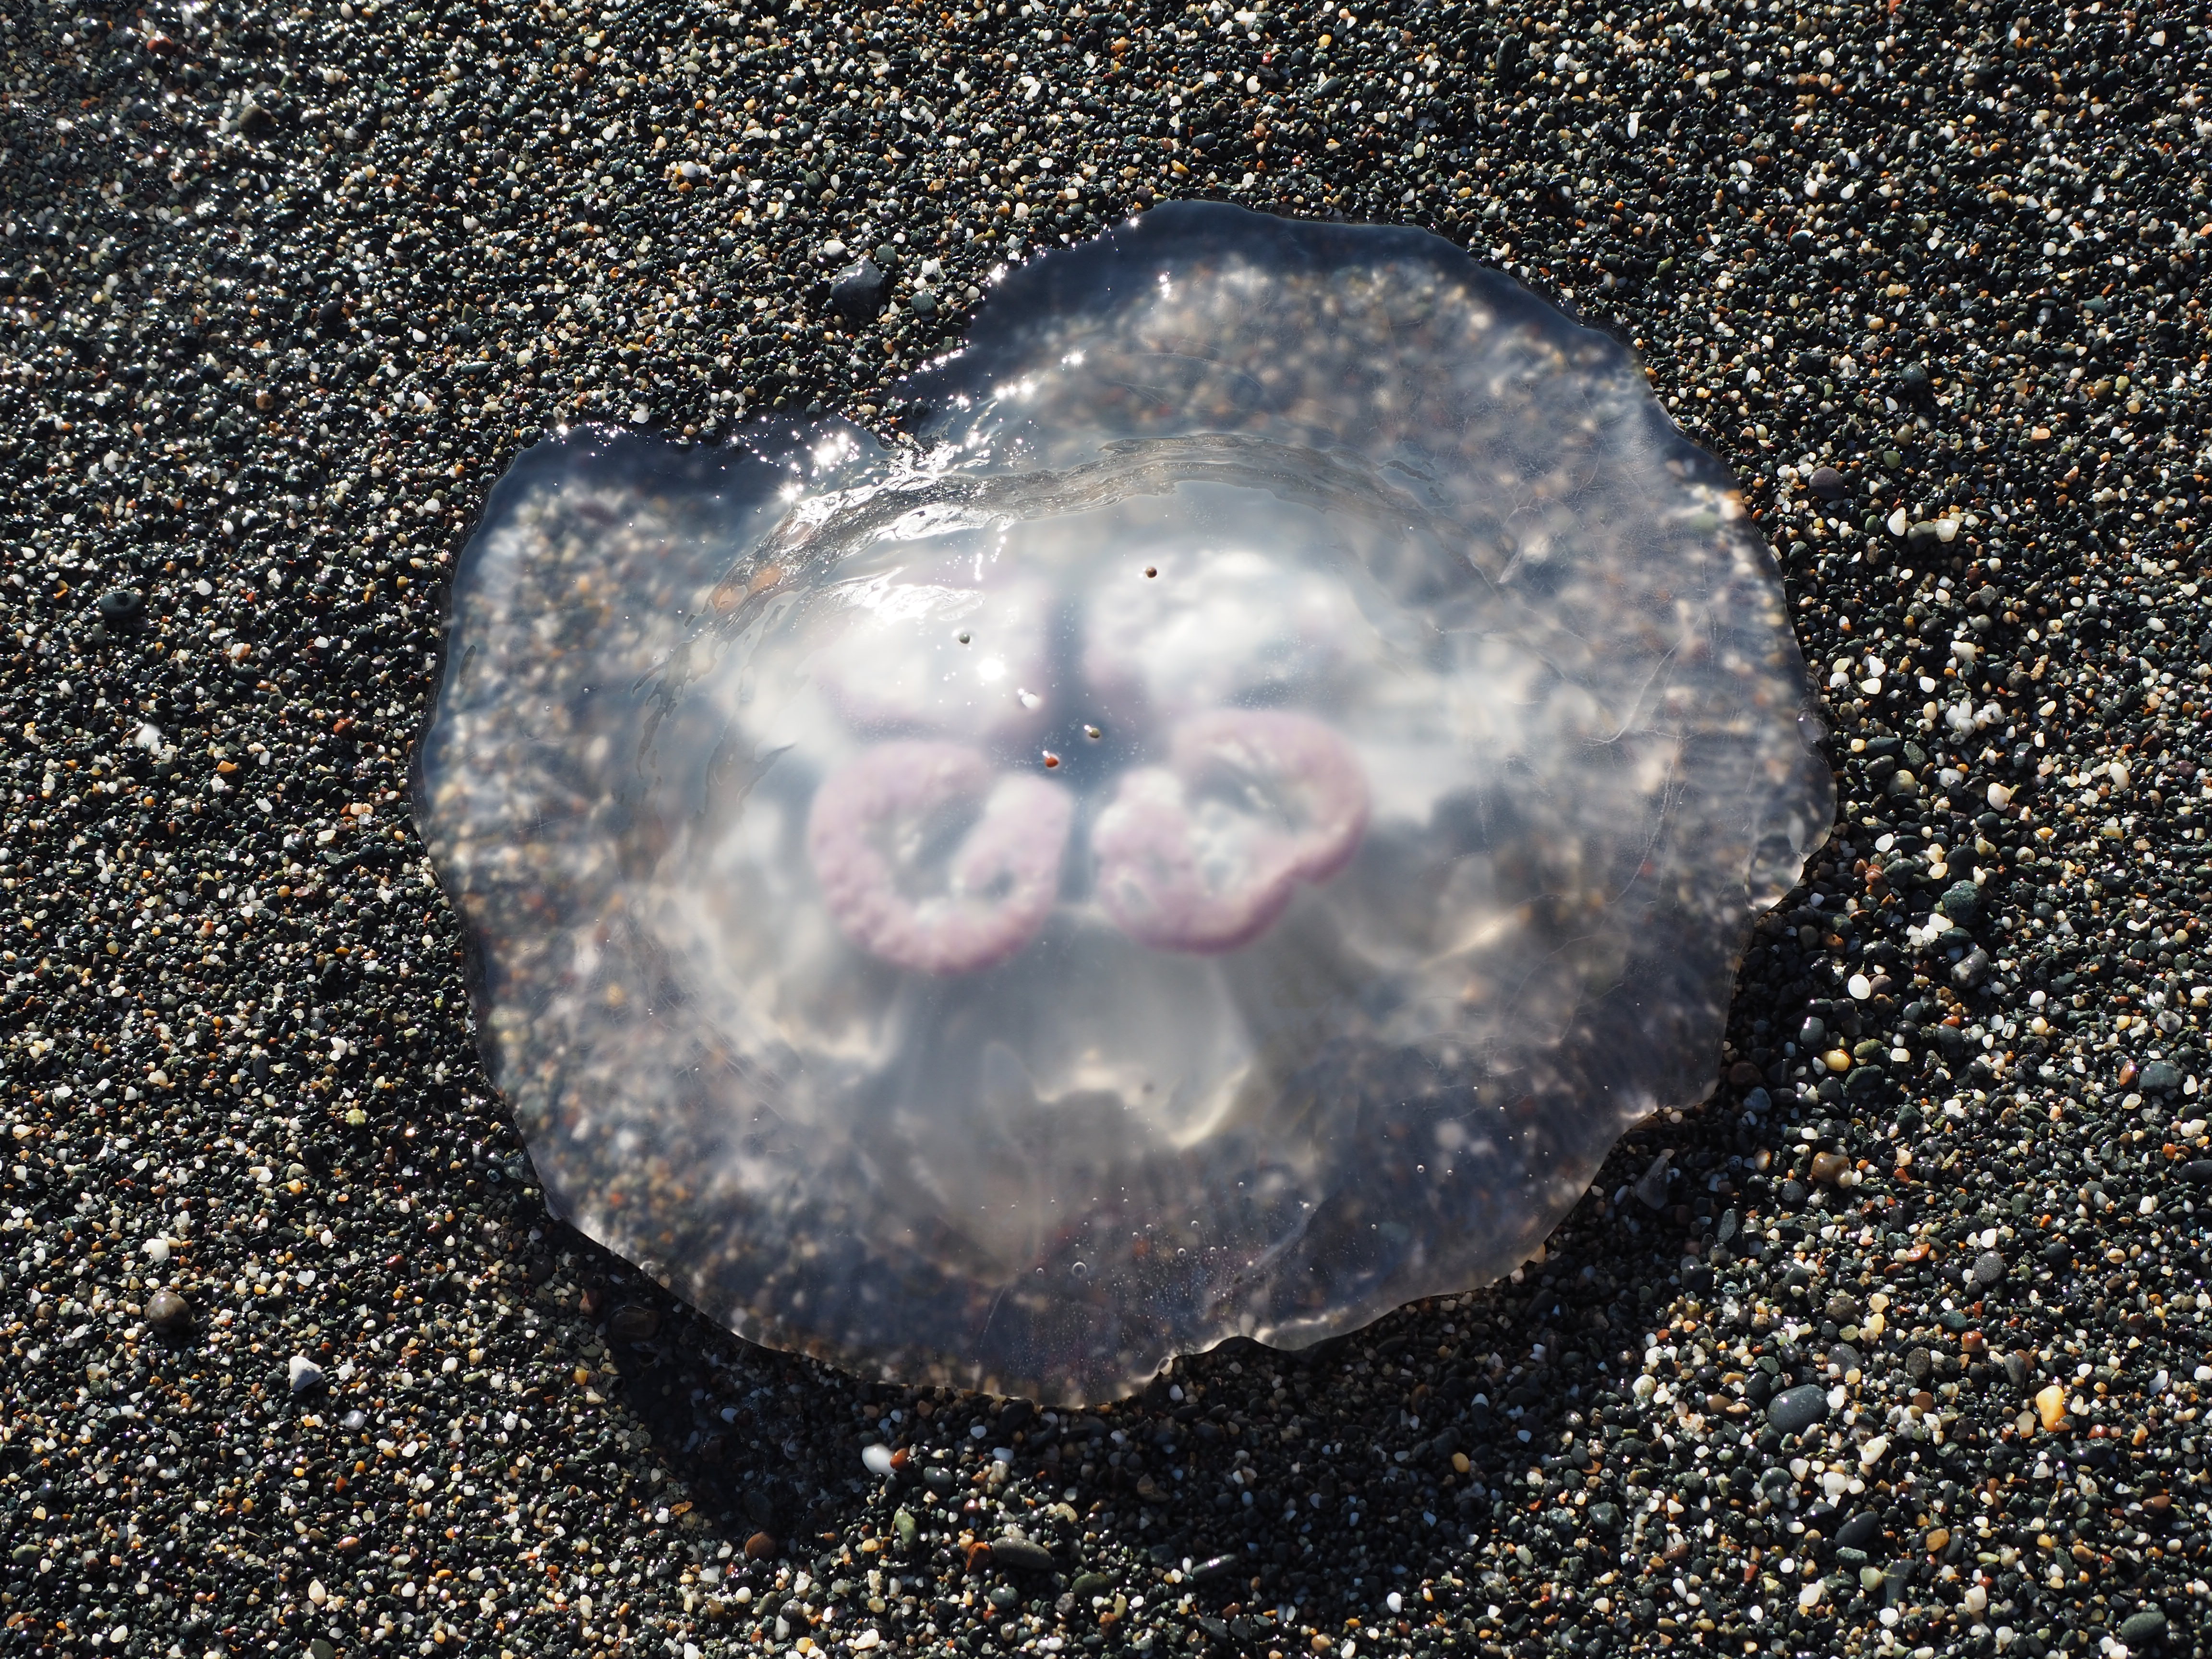 Moon Jellies – some washed up at Pebble Beach. – Mendonoma Sightings